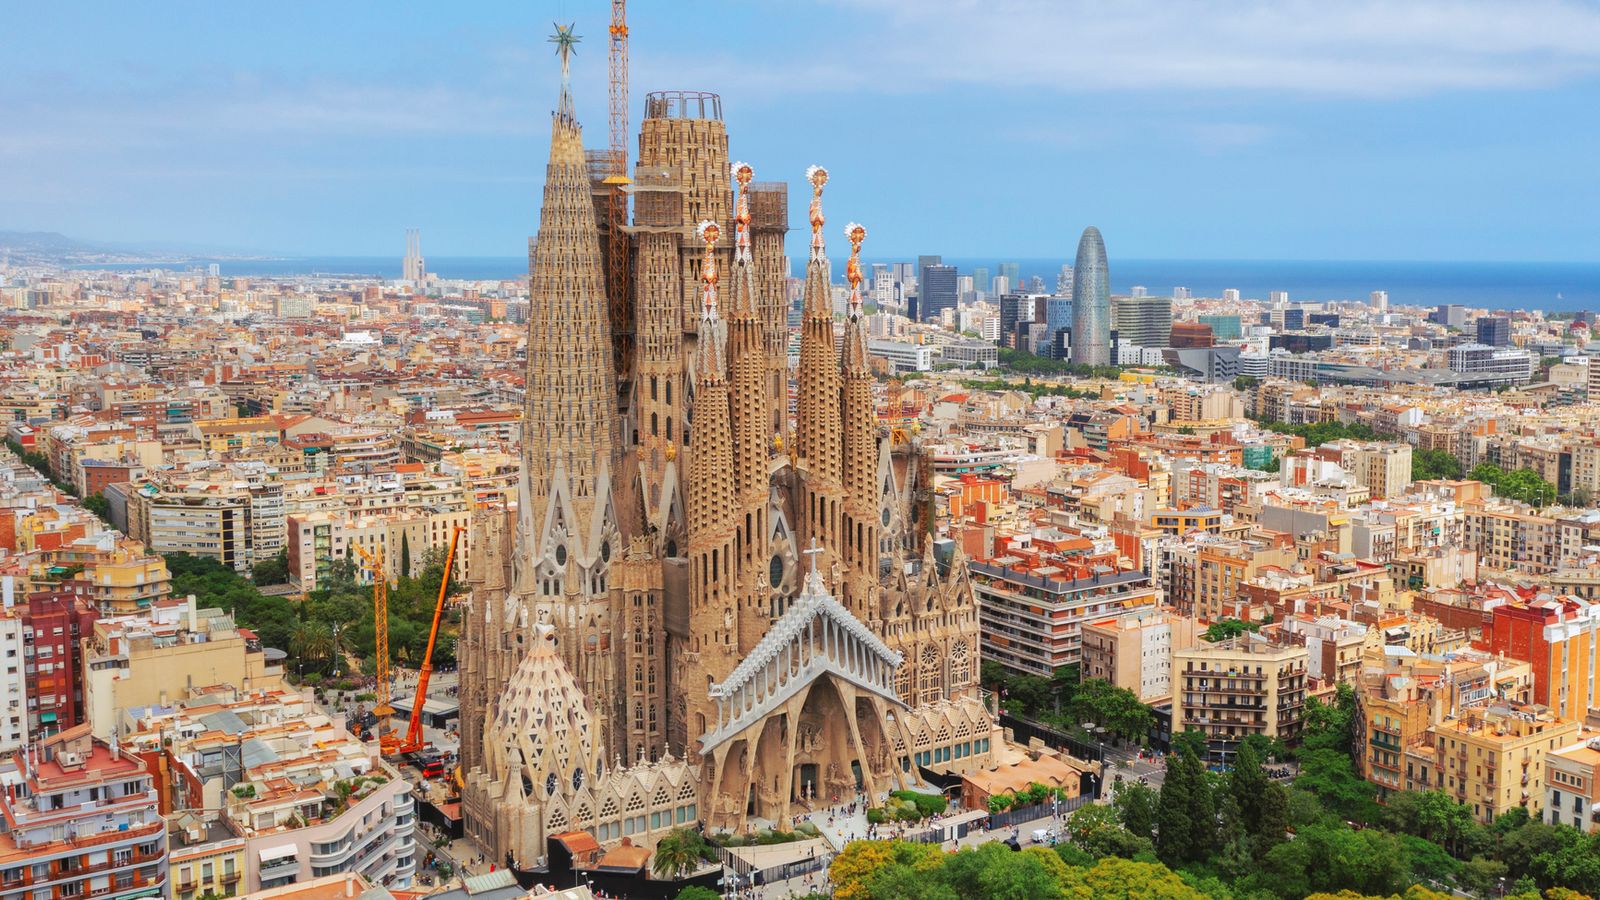 Barcelona\'s Sagrada Familia to be Completed by 2026 After 144 Years: A Look at the Monumental Basilica